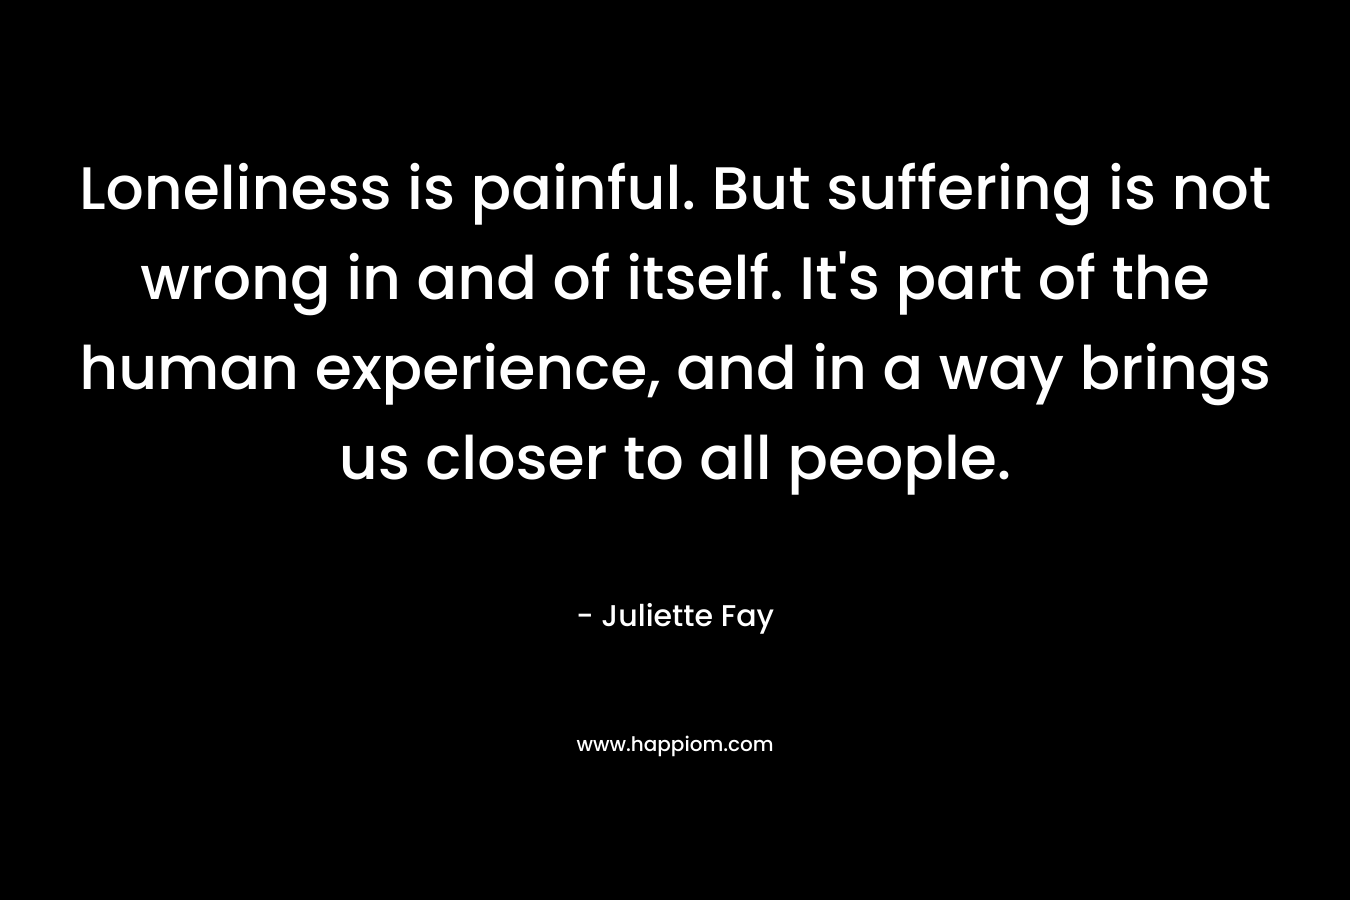 Loneliness is painful. But suffering is not wrong in and of itself. It's part of the human experience, and in a way brings us closer to all people.